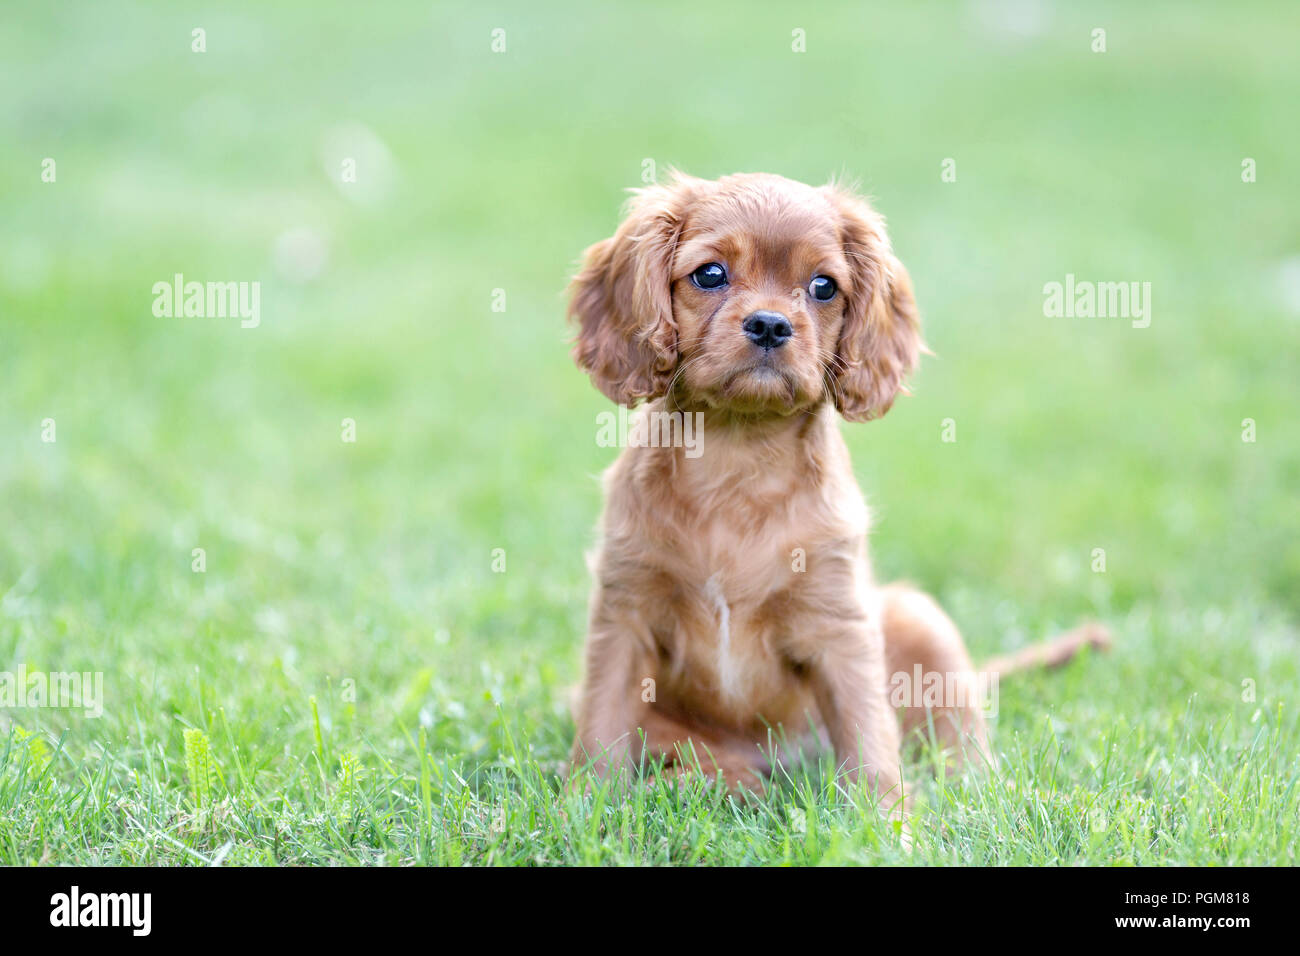 Cute puppy sitting on the green grass Stock Photo